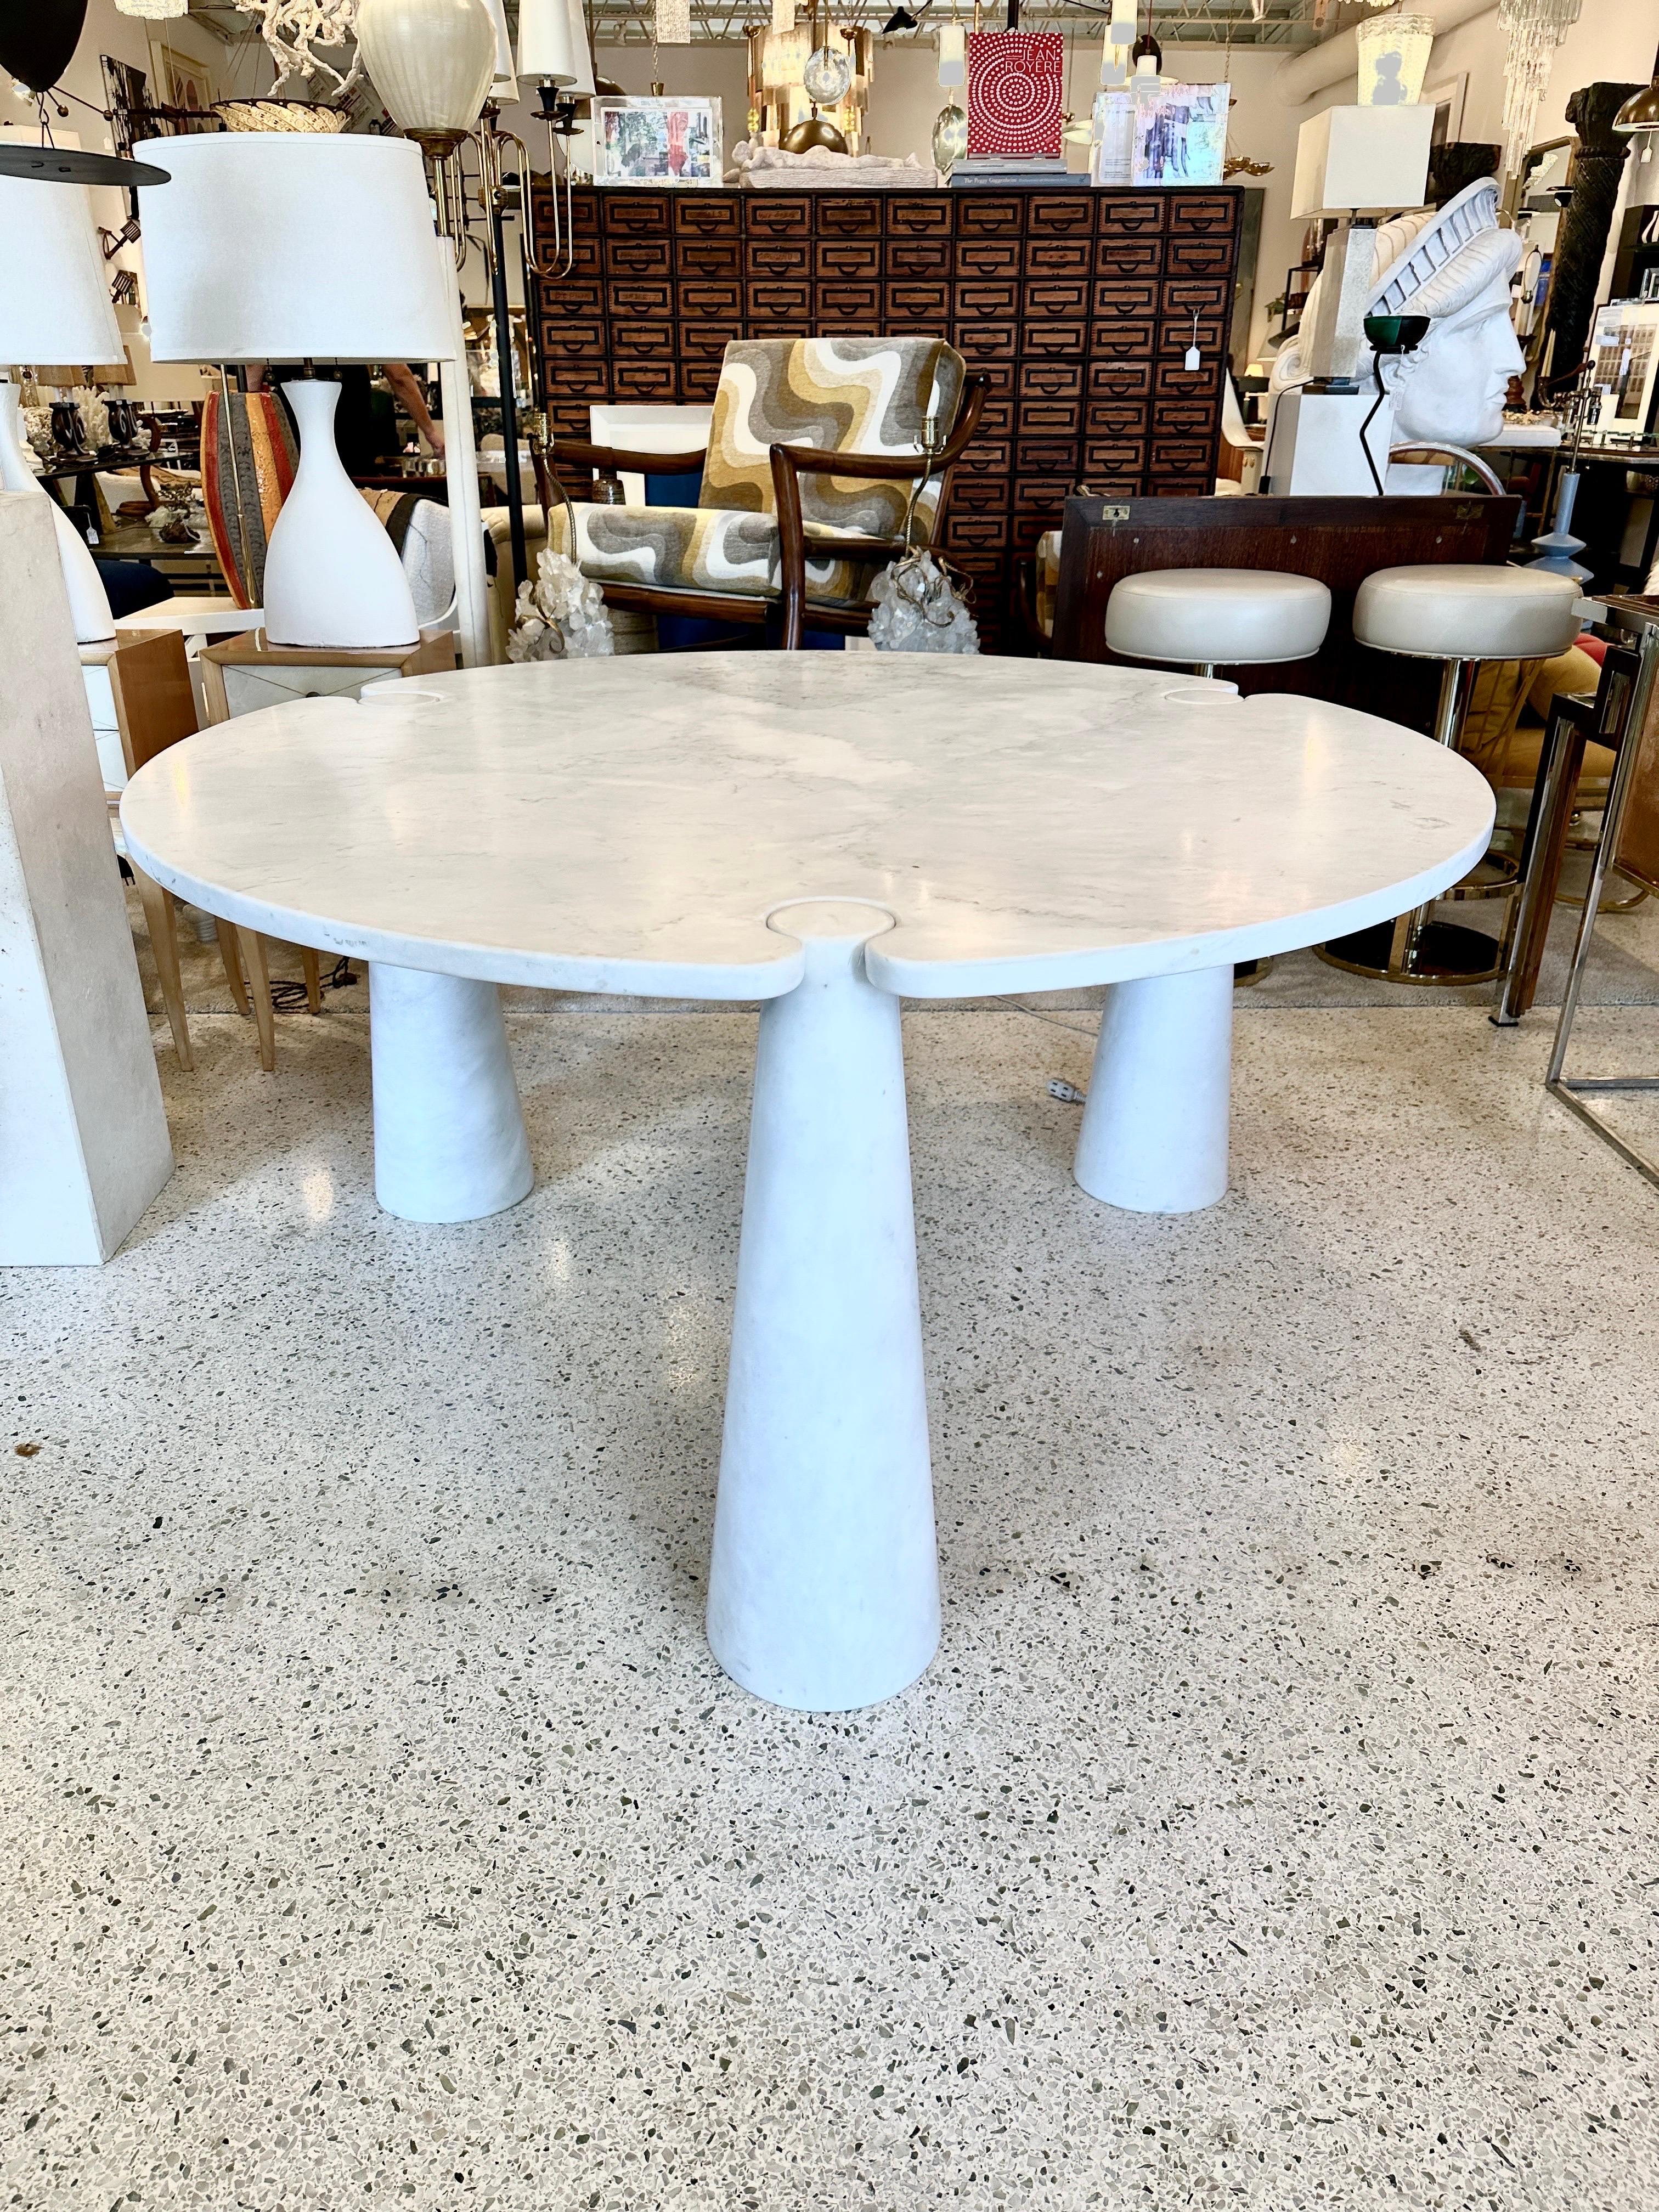 Angelo Mangiarotti 'Eros' Round Marble Dining Table, Italy, 1970s For Sale 1